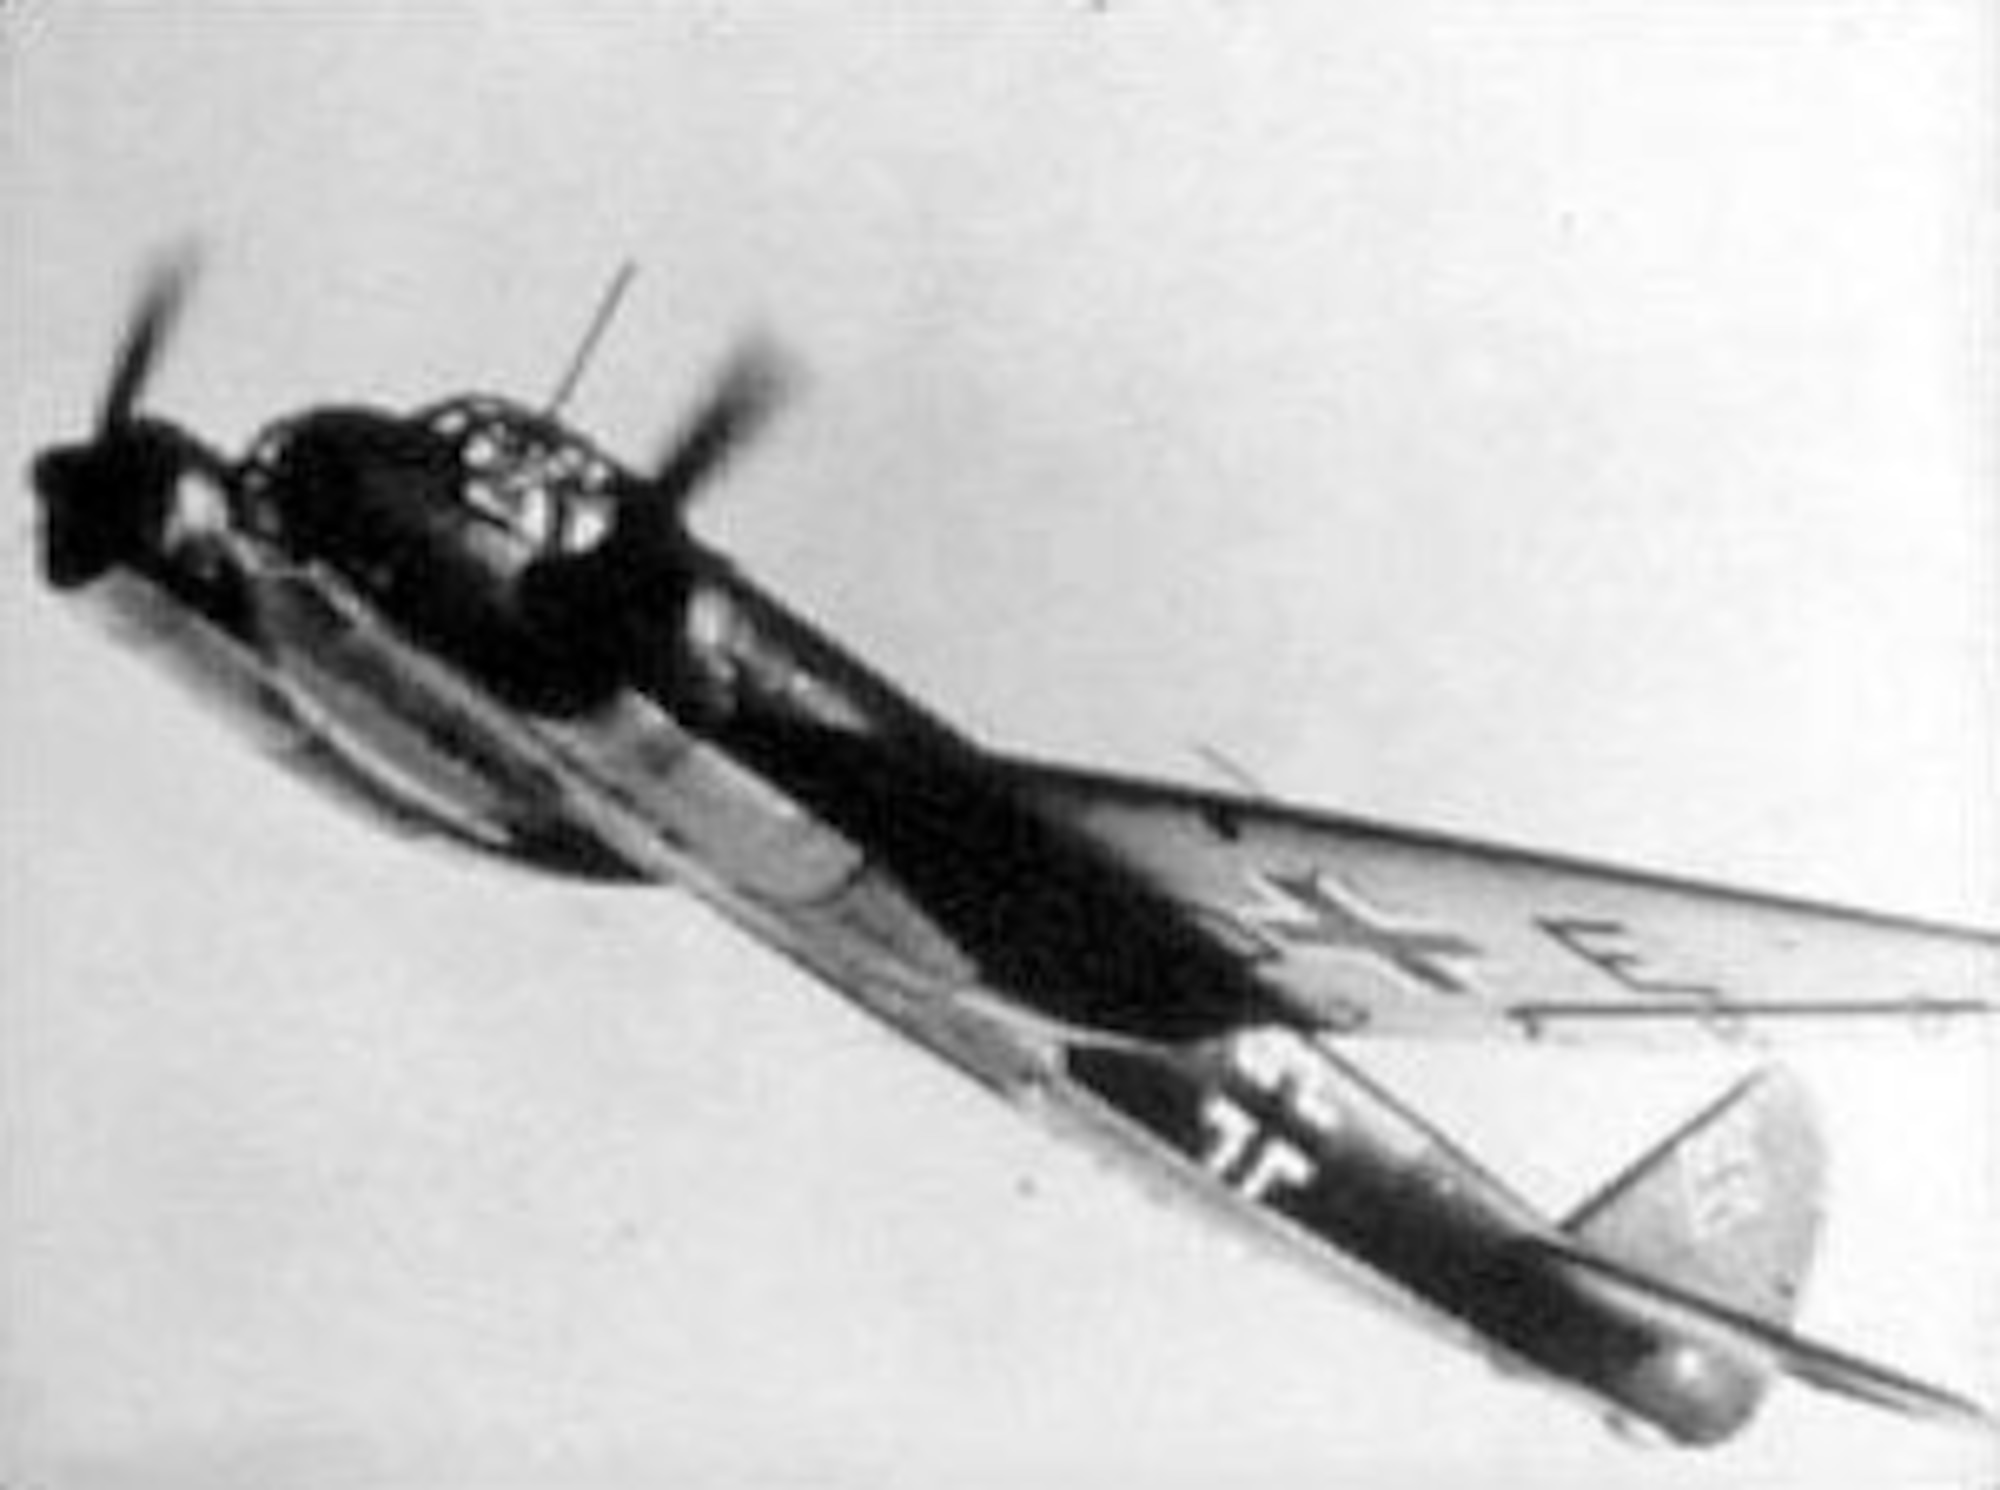 The Luftwaffe also relied upon twin-engine planes such as the Junkers Ju 88 (shown here) and the Messerschmitt Me 110, particularly when AAF bombers flew above the heavy clouds. (U.S. Air Force photo)